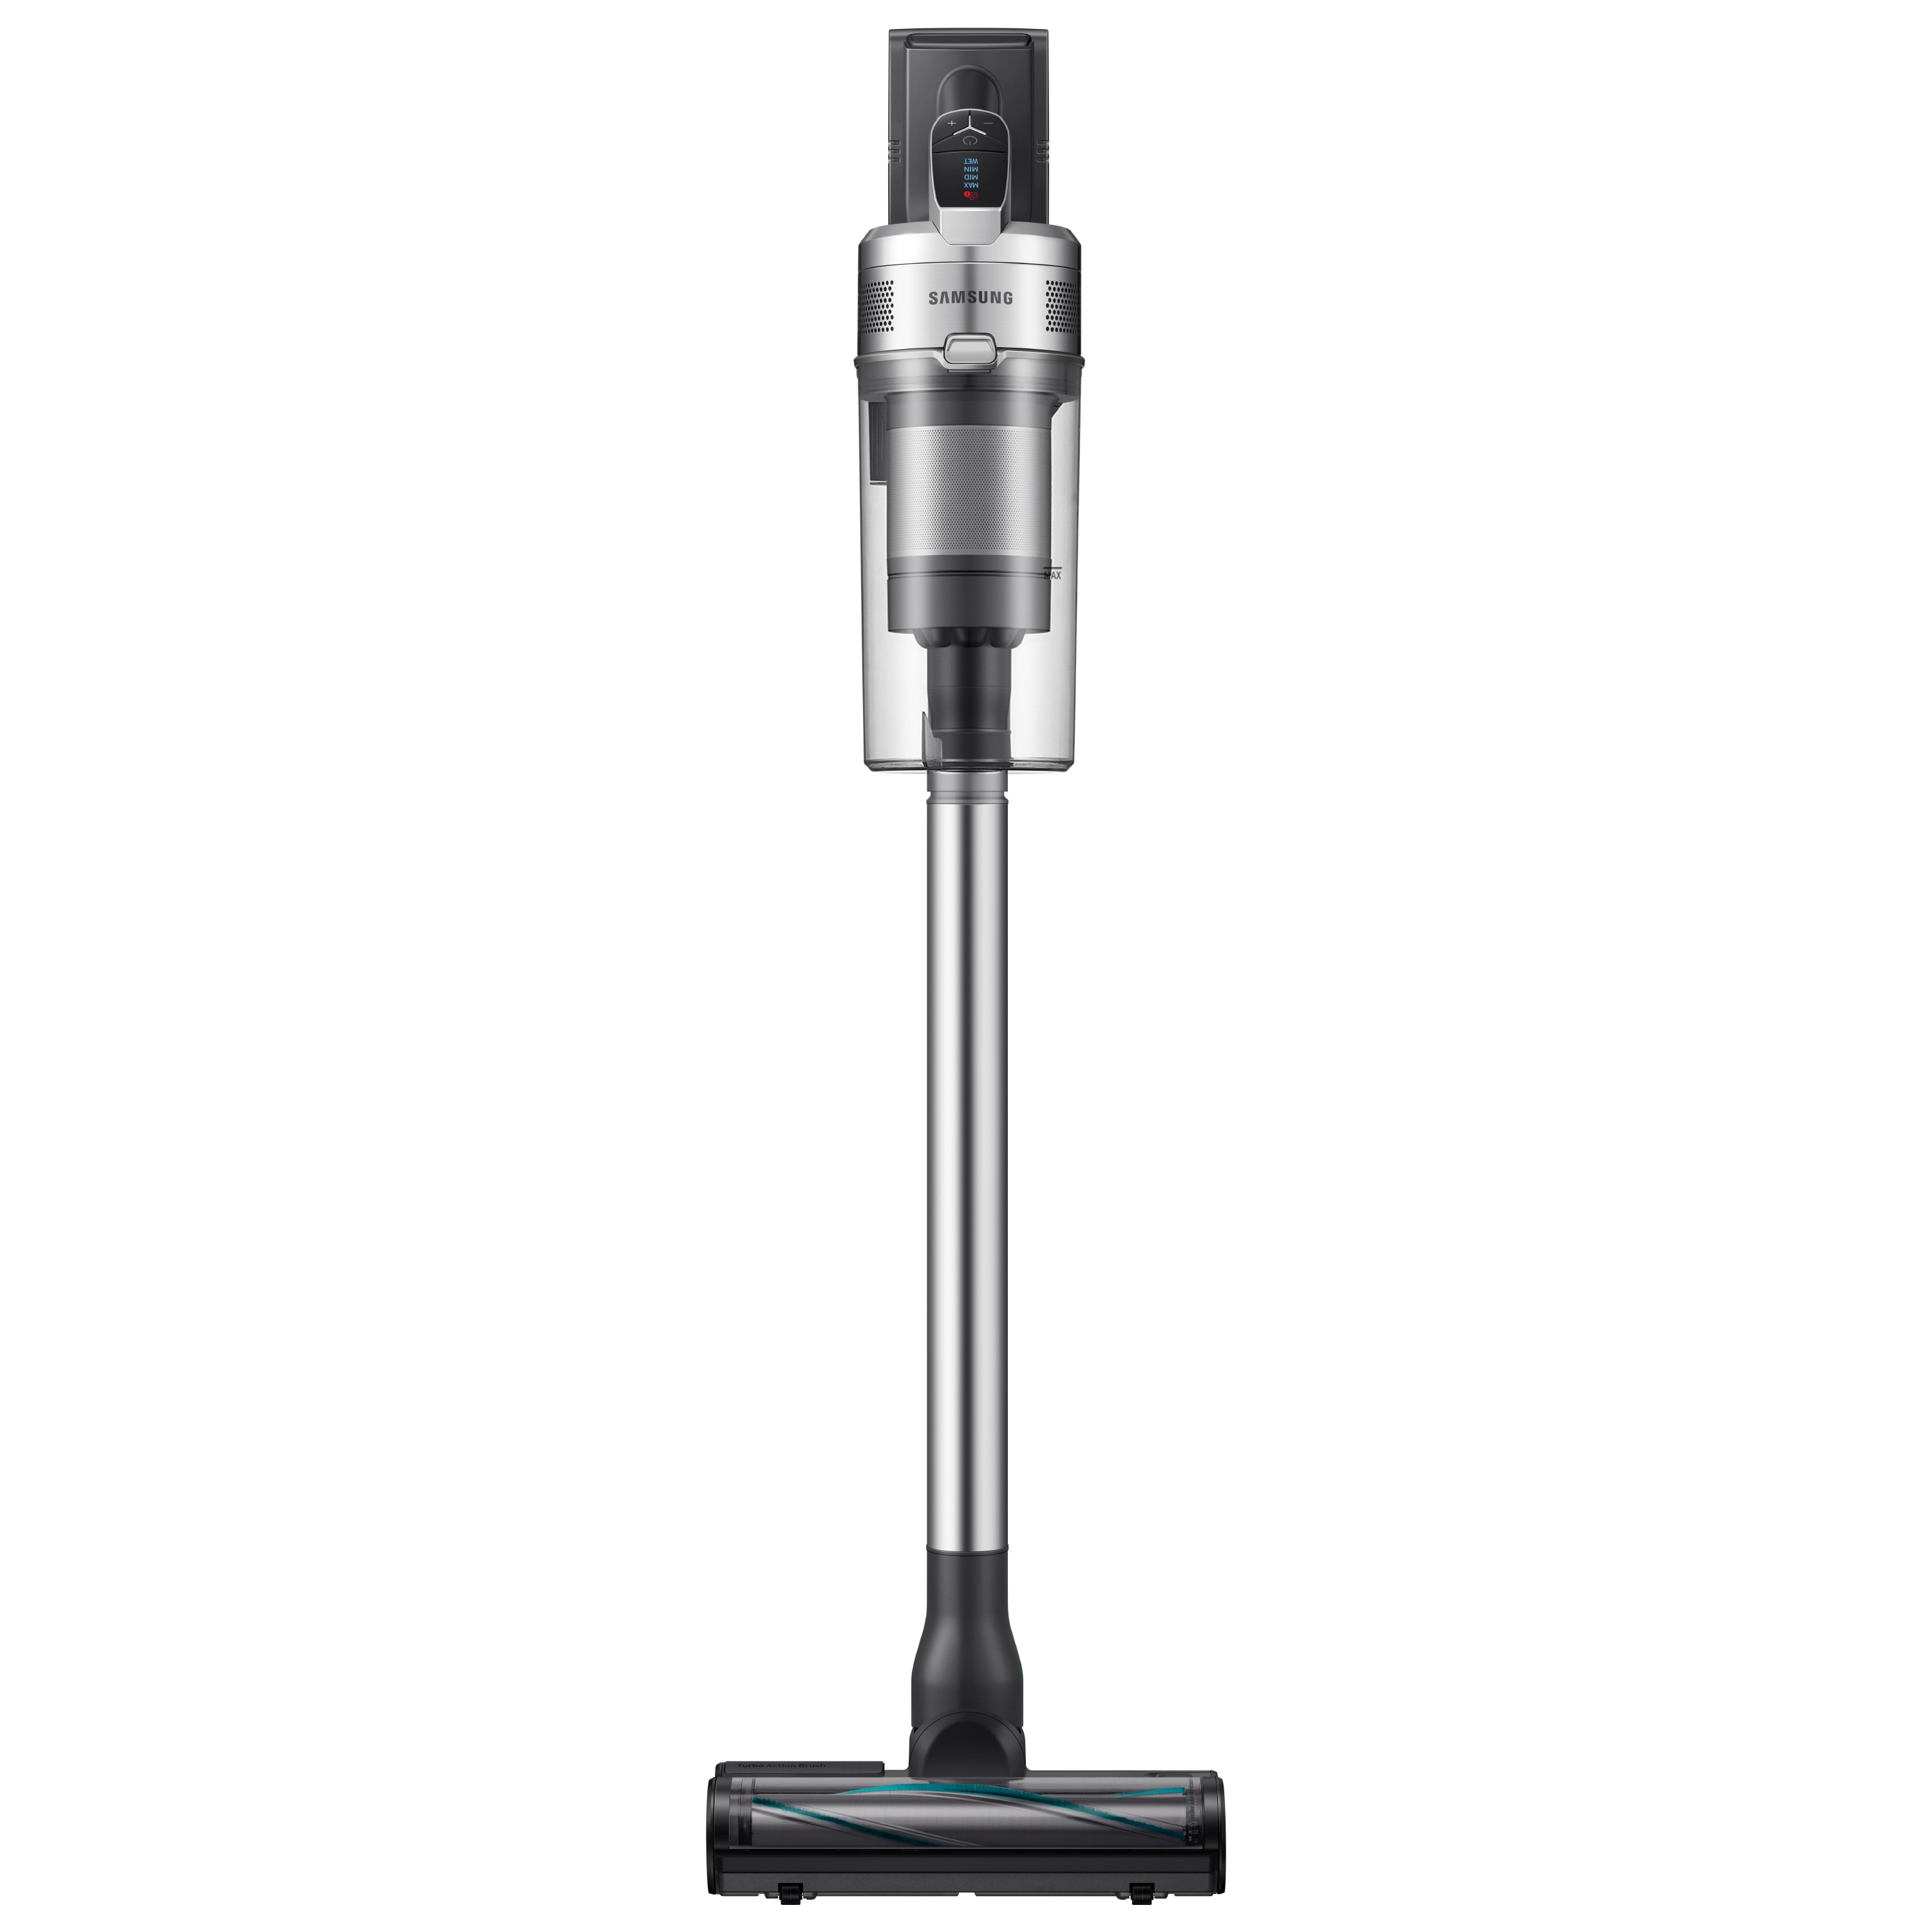 in department To Pet Stick Volt 90 at Bundle the Samsung Clean and Cordless Handheld) (Convertible Stick Jet Station Vacuums Vacuum 21.9